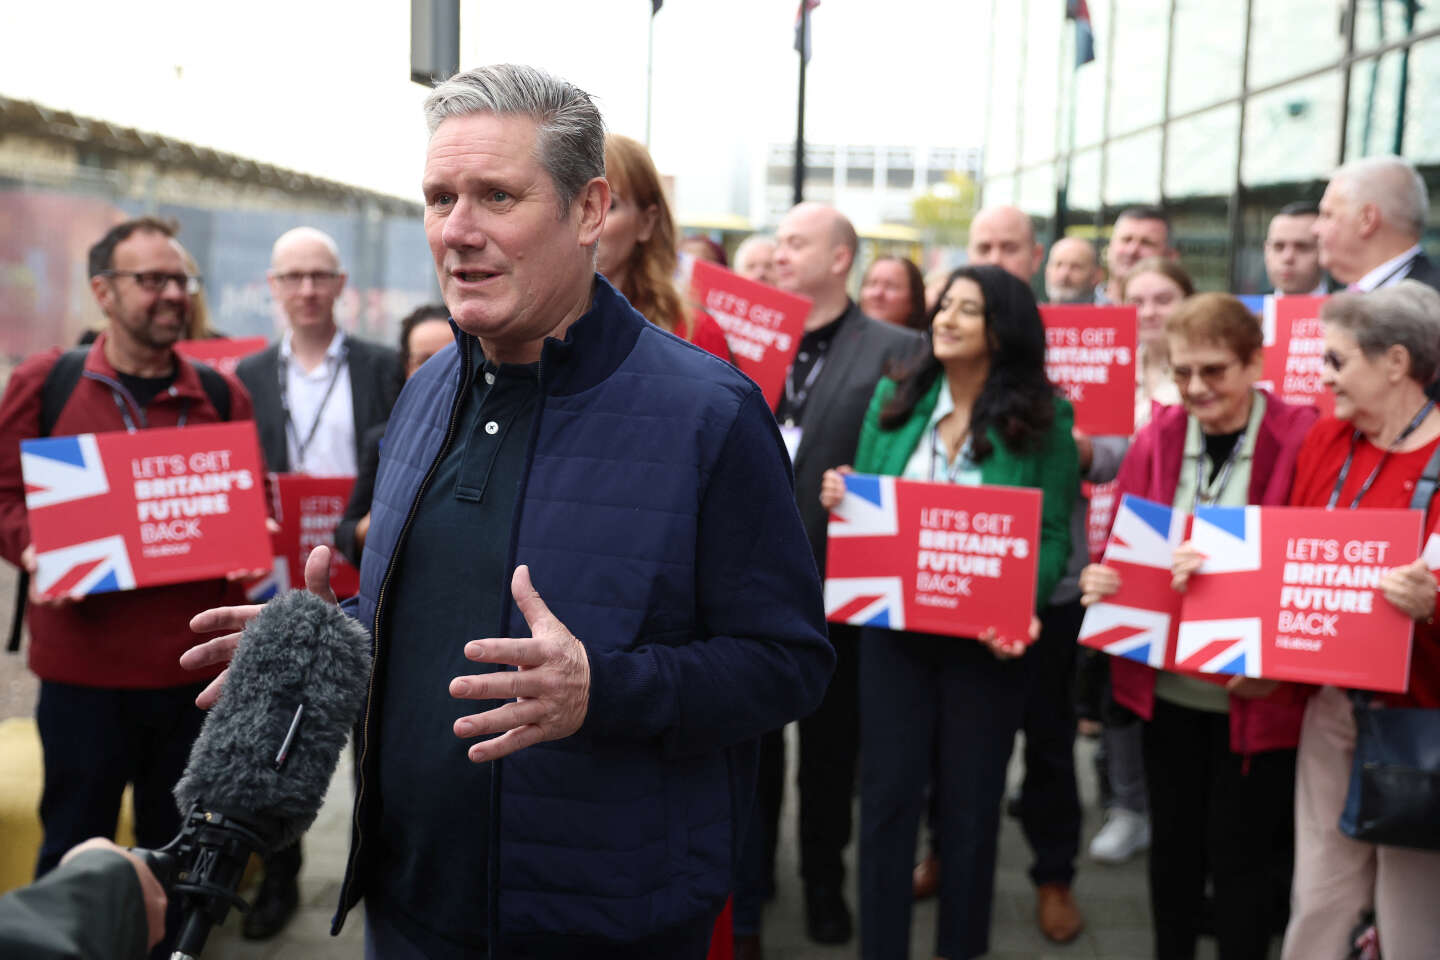 In the United Kingdom, Keir Starmer led a refocused Labor Party to the threshold of power